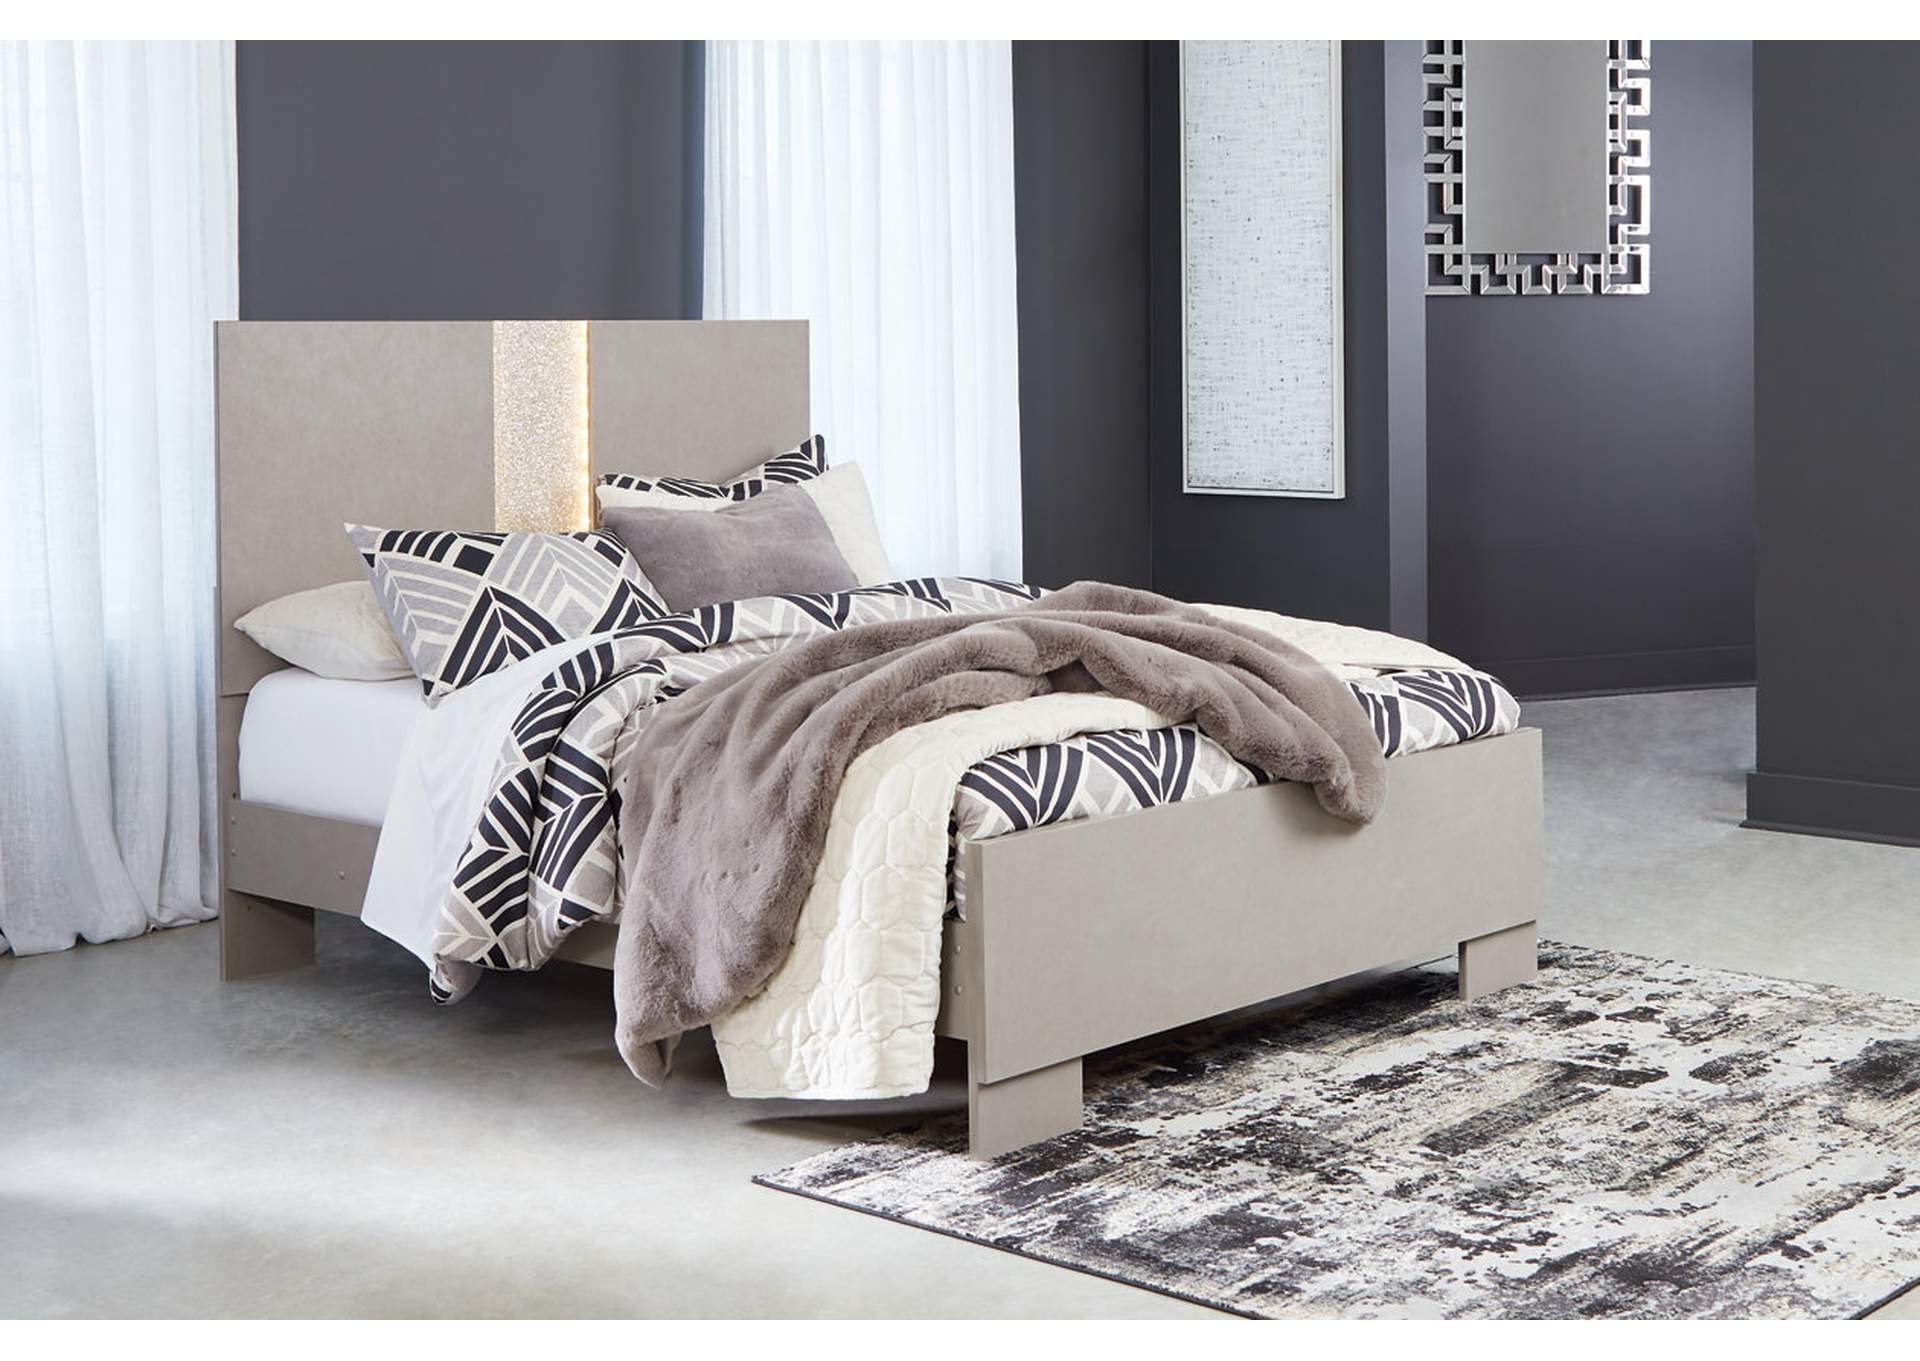 Surancha Queen Panel Bed,Signature Design By Ashley